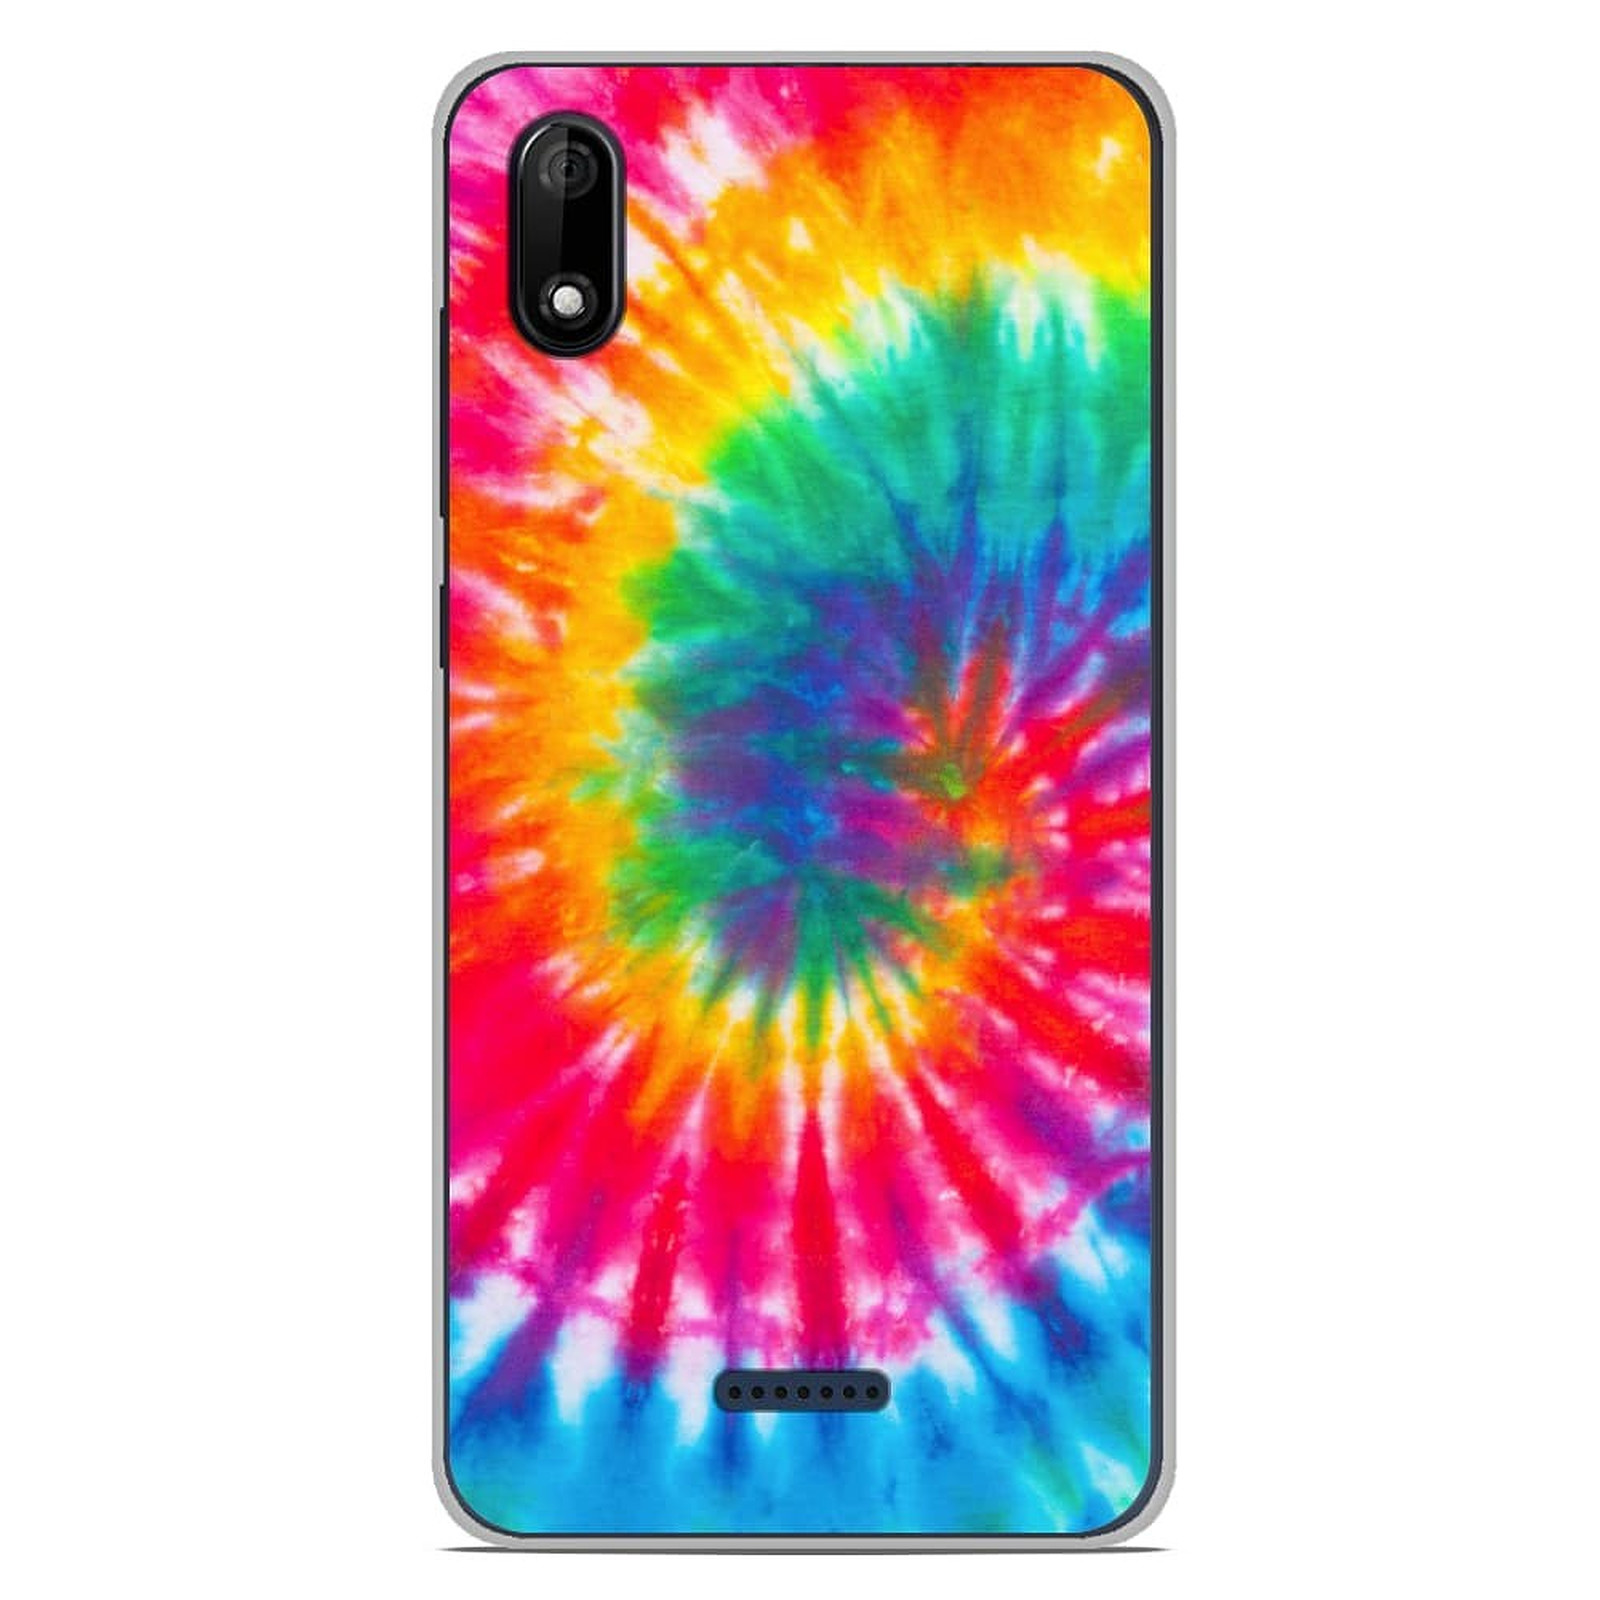 1001 Coques Coque silicone gel Wiko Y80 motif Tie Dye Spirale - Coque telephone 1001Coques